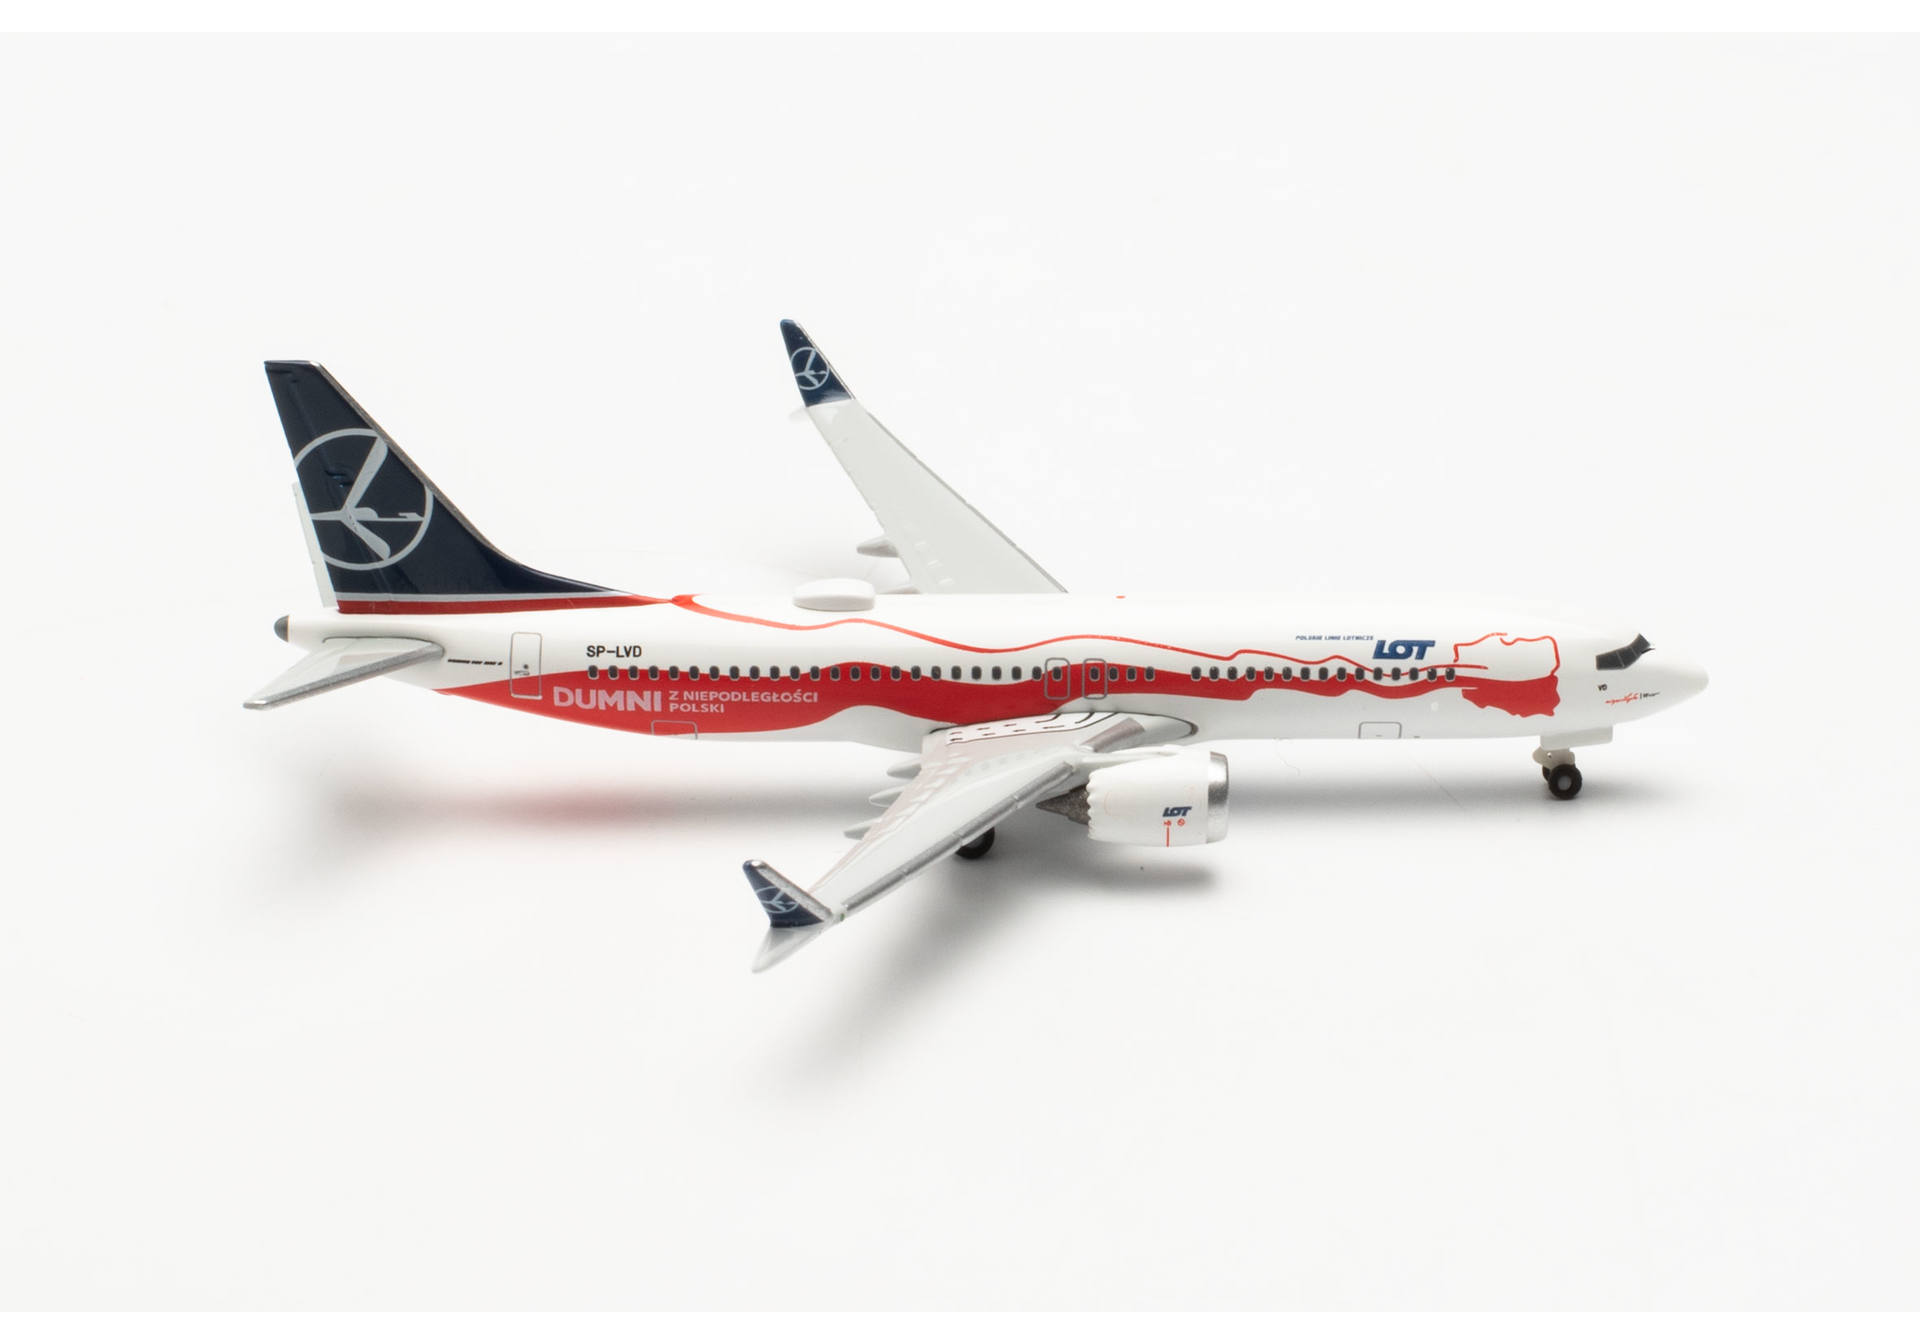 LOT Polish Airlines Boeing 737 Max 8 “Proud of Poland‘s Independence” – SP-LVD